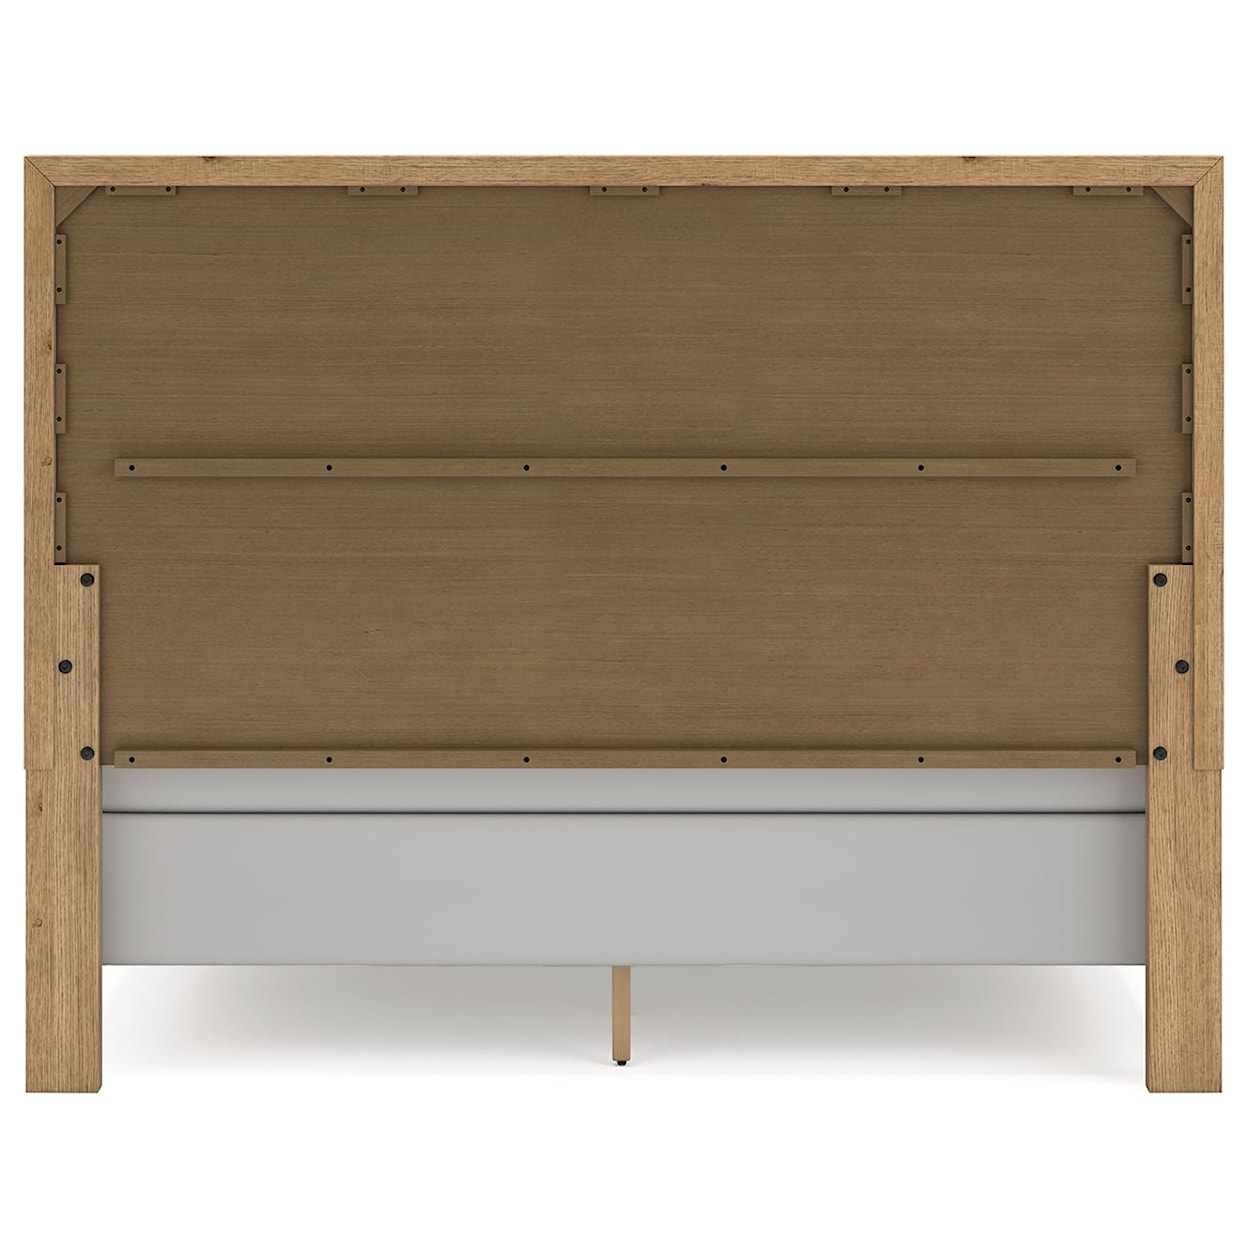 Signature Design by Ashley Furniture Galliden King Panel Bed